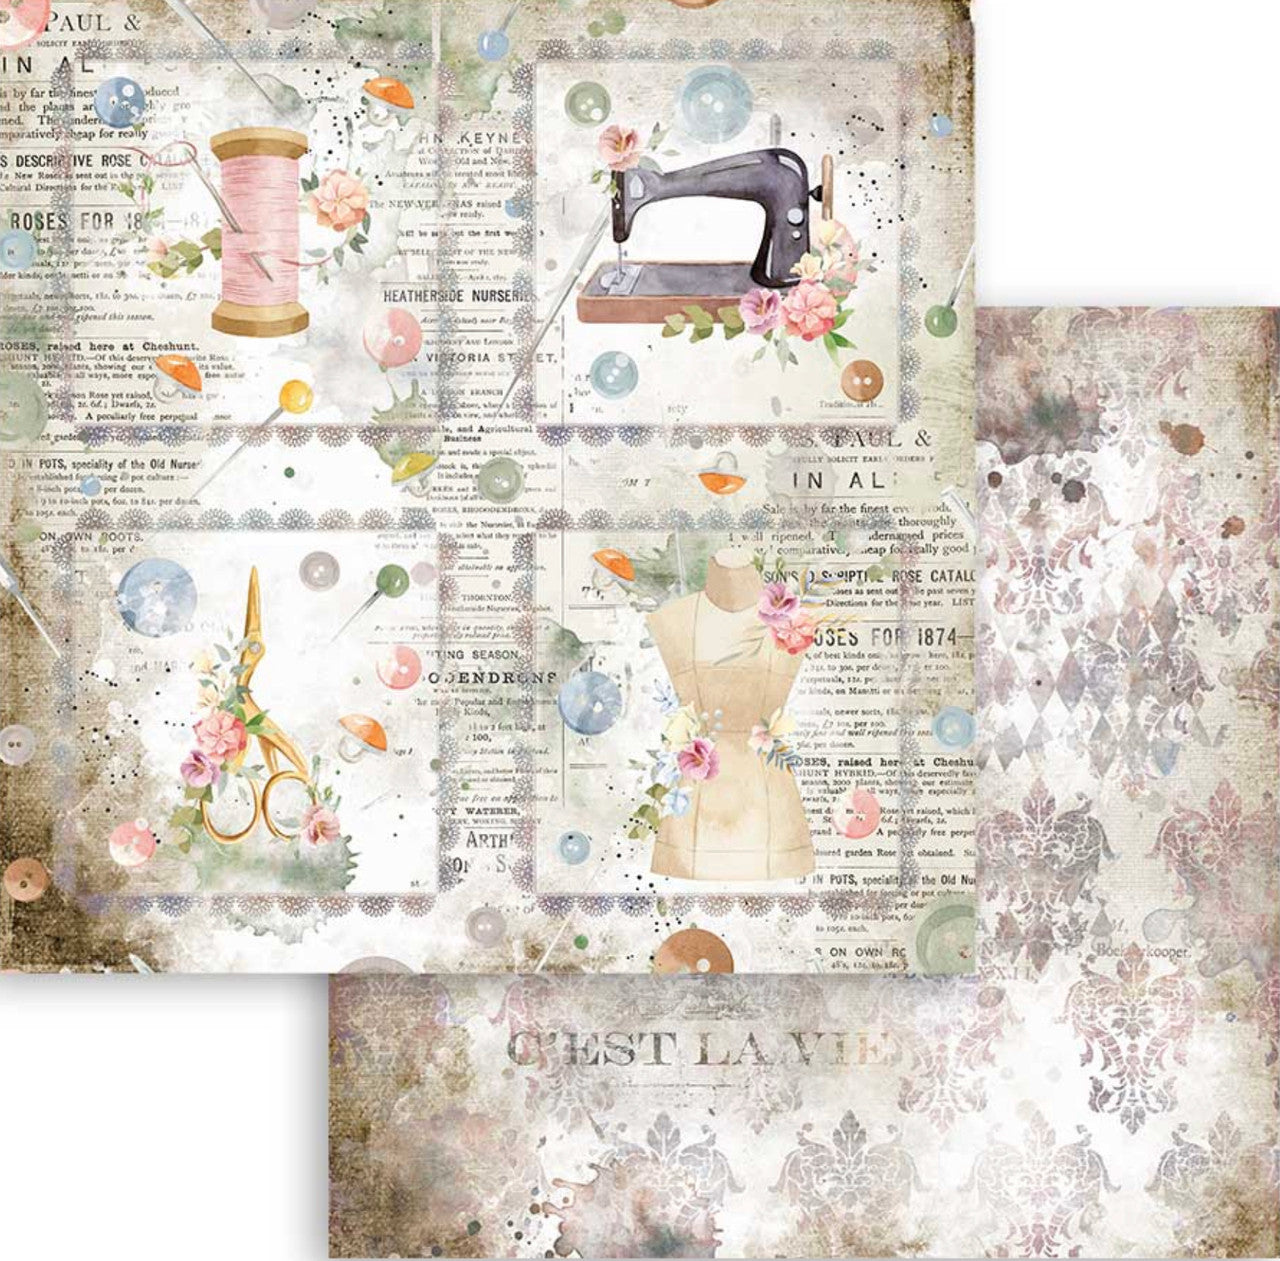 Stamperia Romantic Threads 12” x 12” Paper Collection